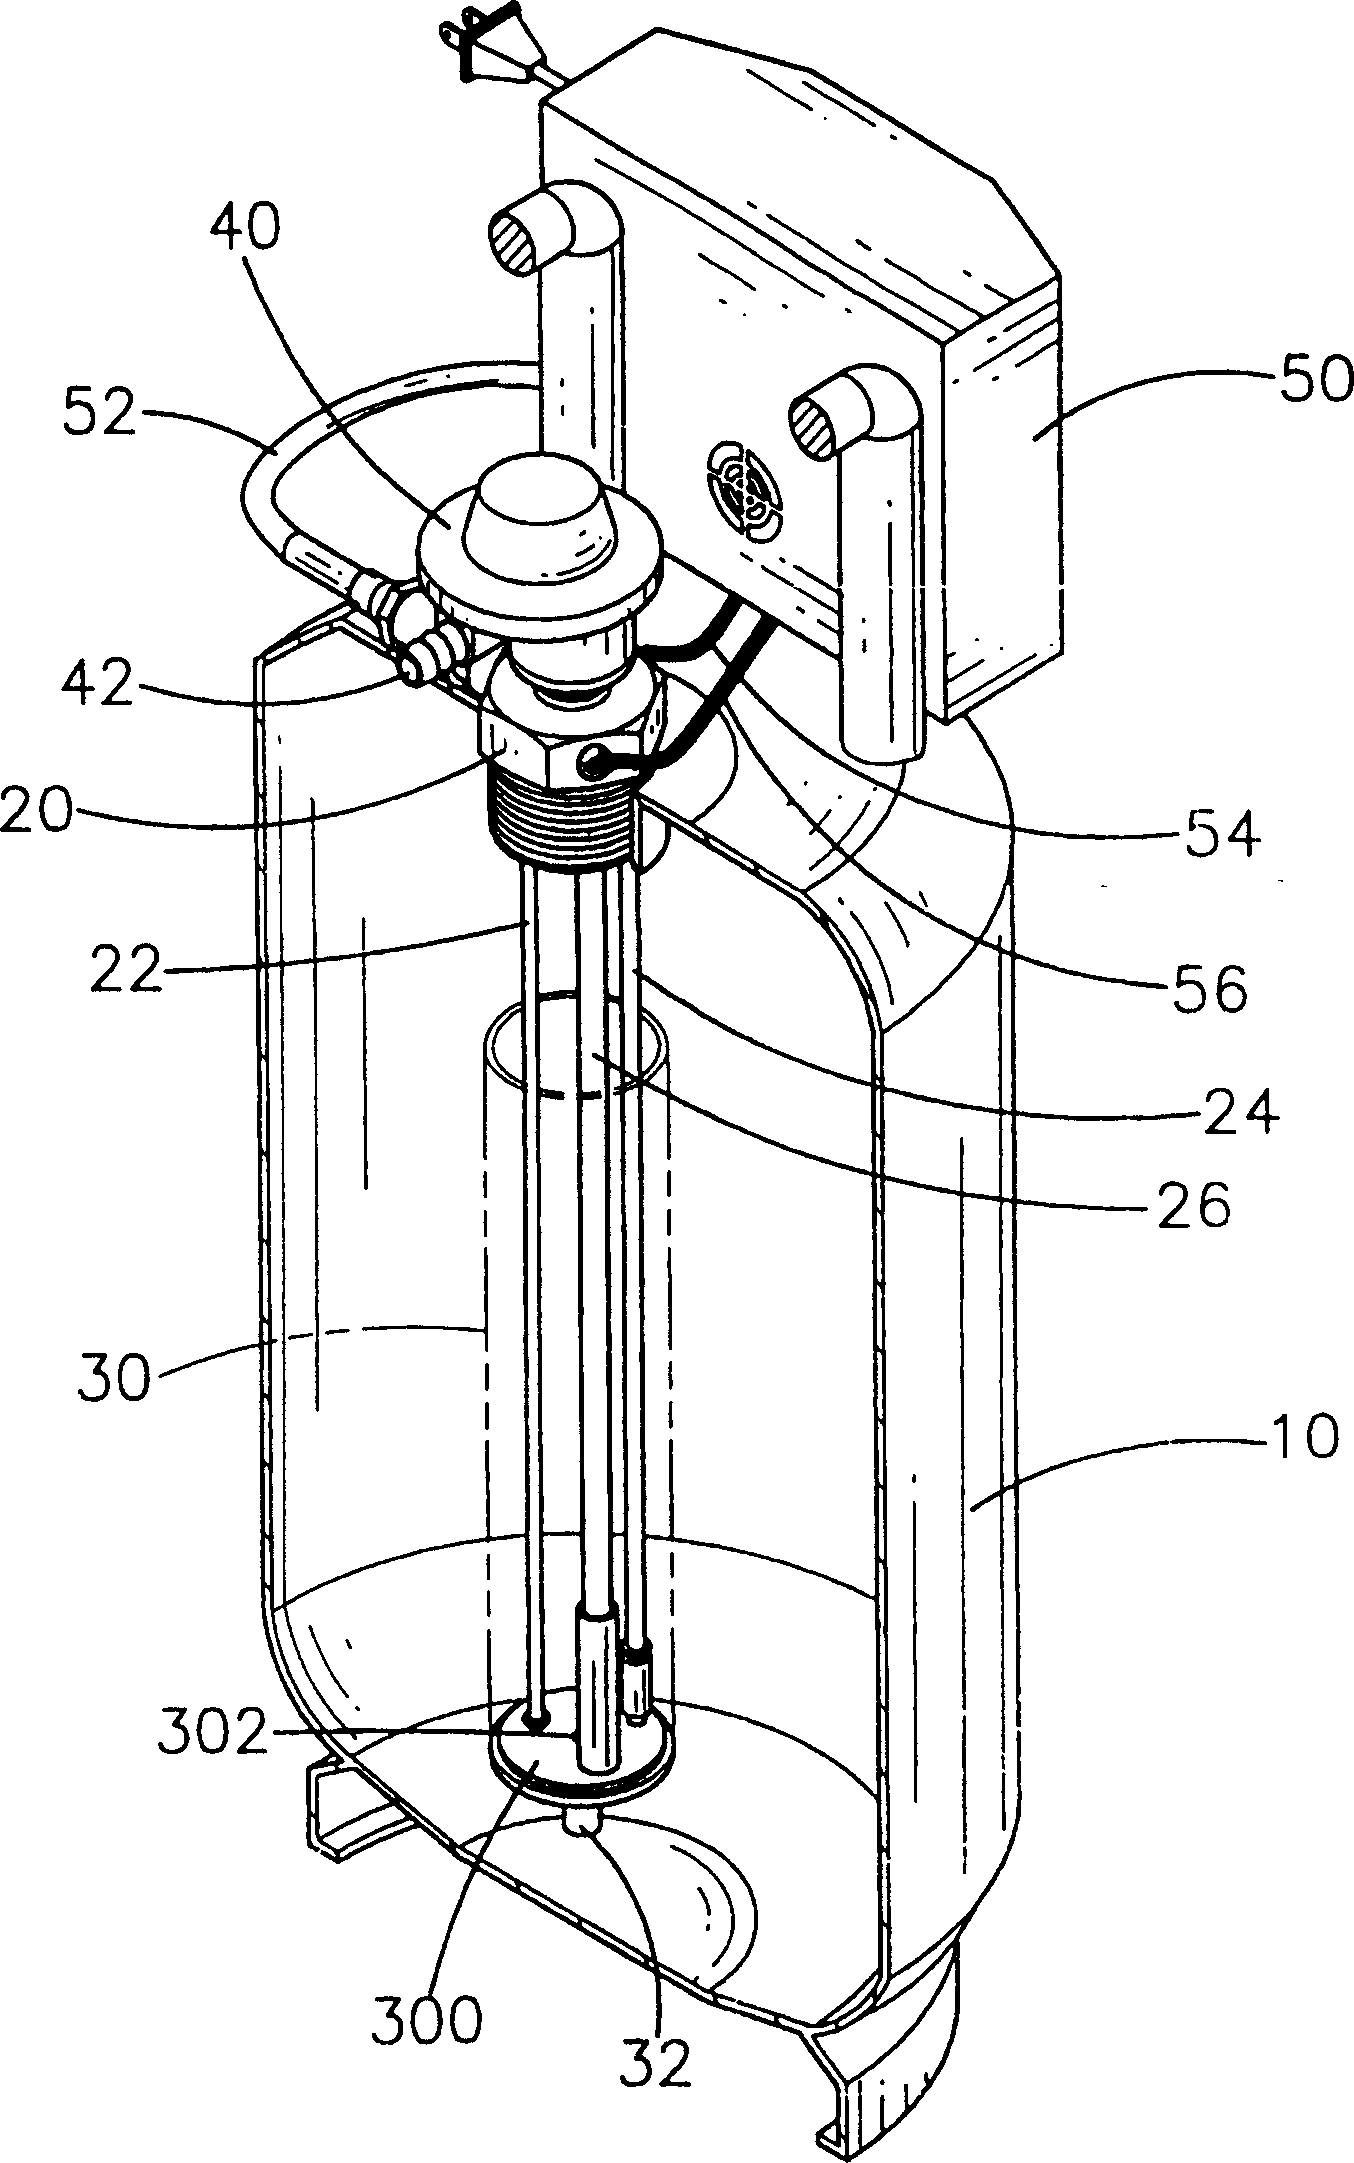 Constant temp gas supply device for liquid state fuel tank